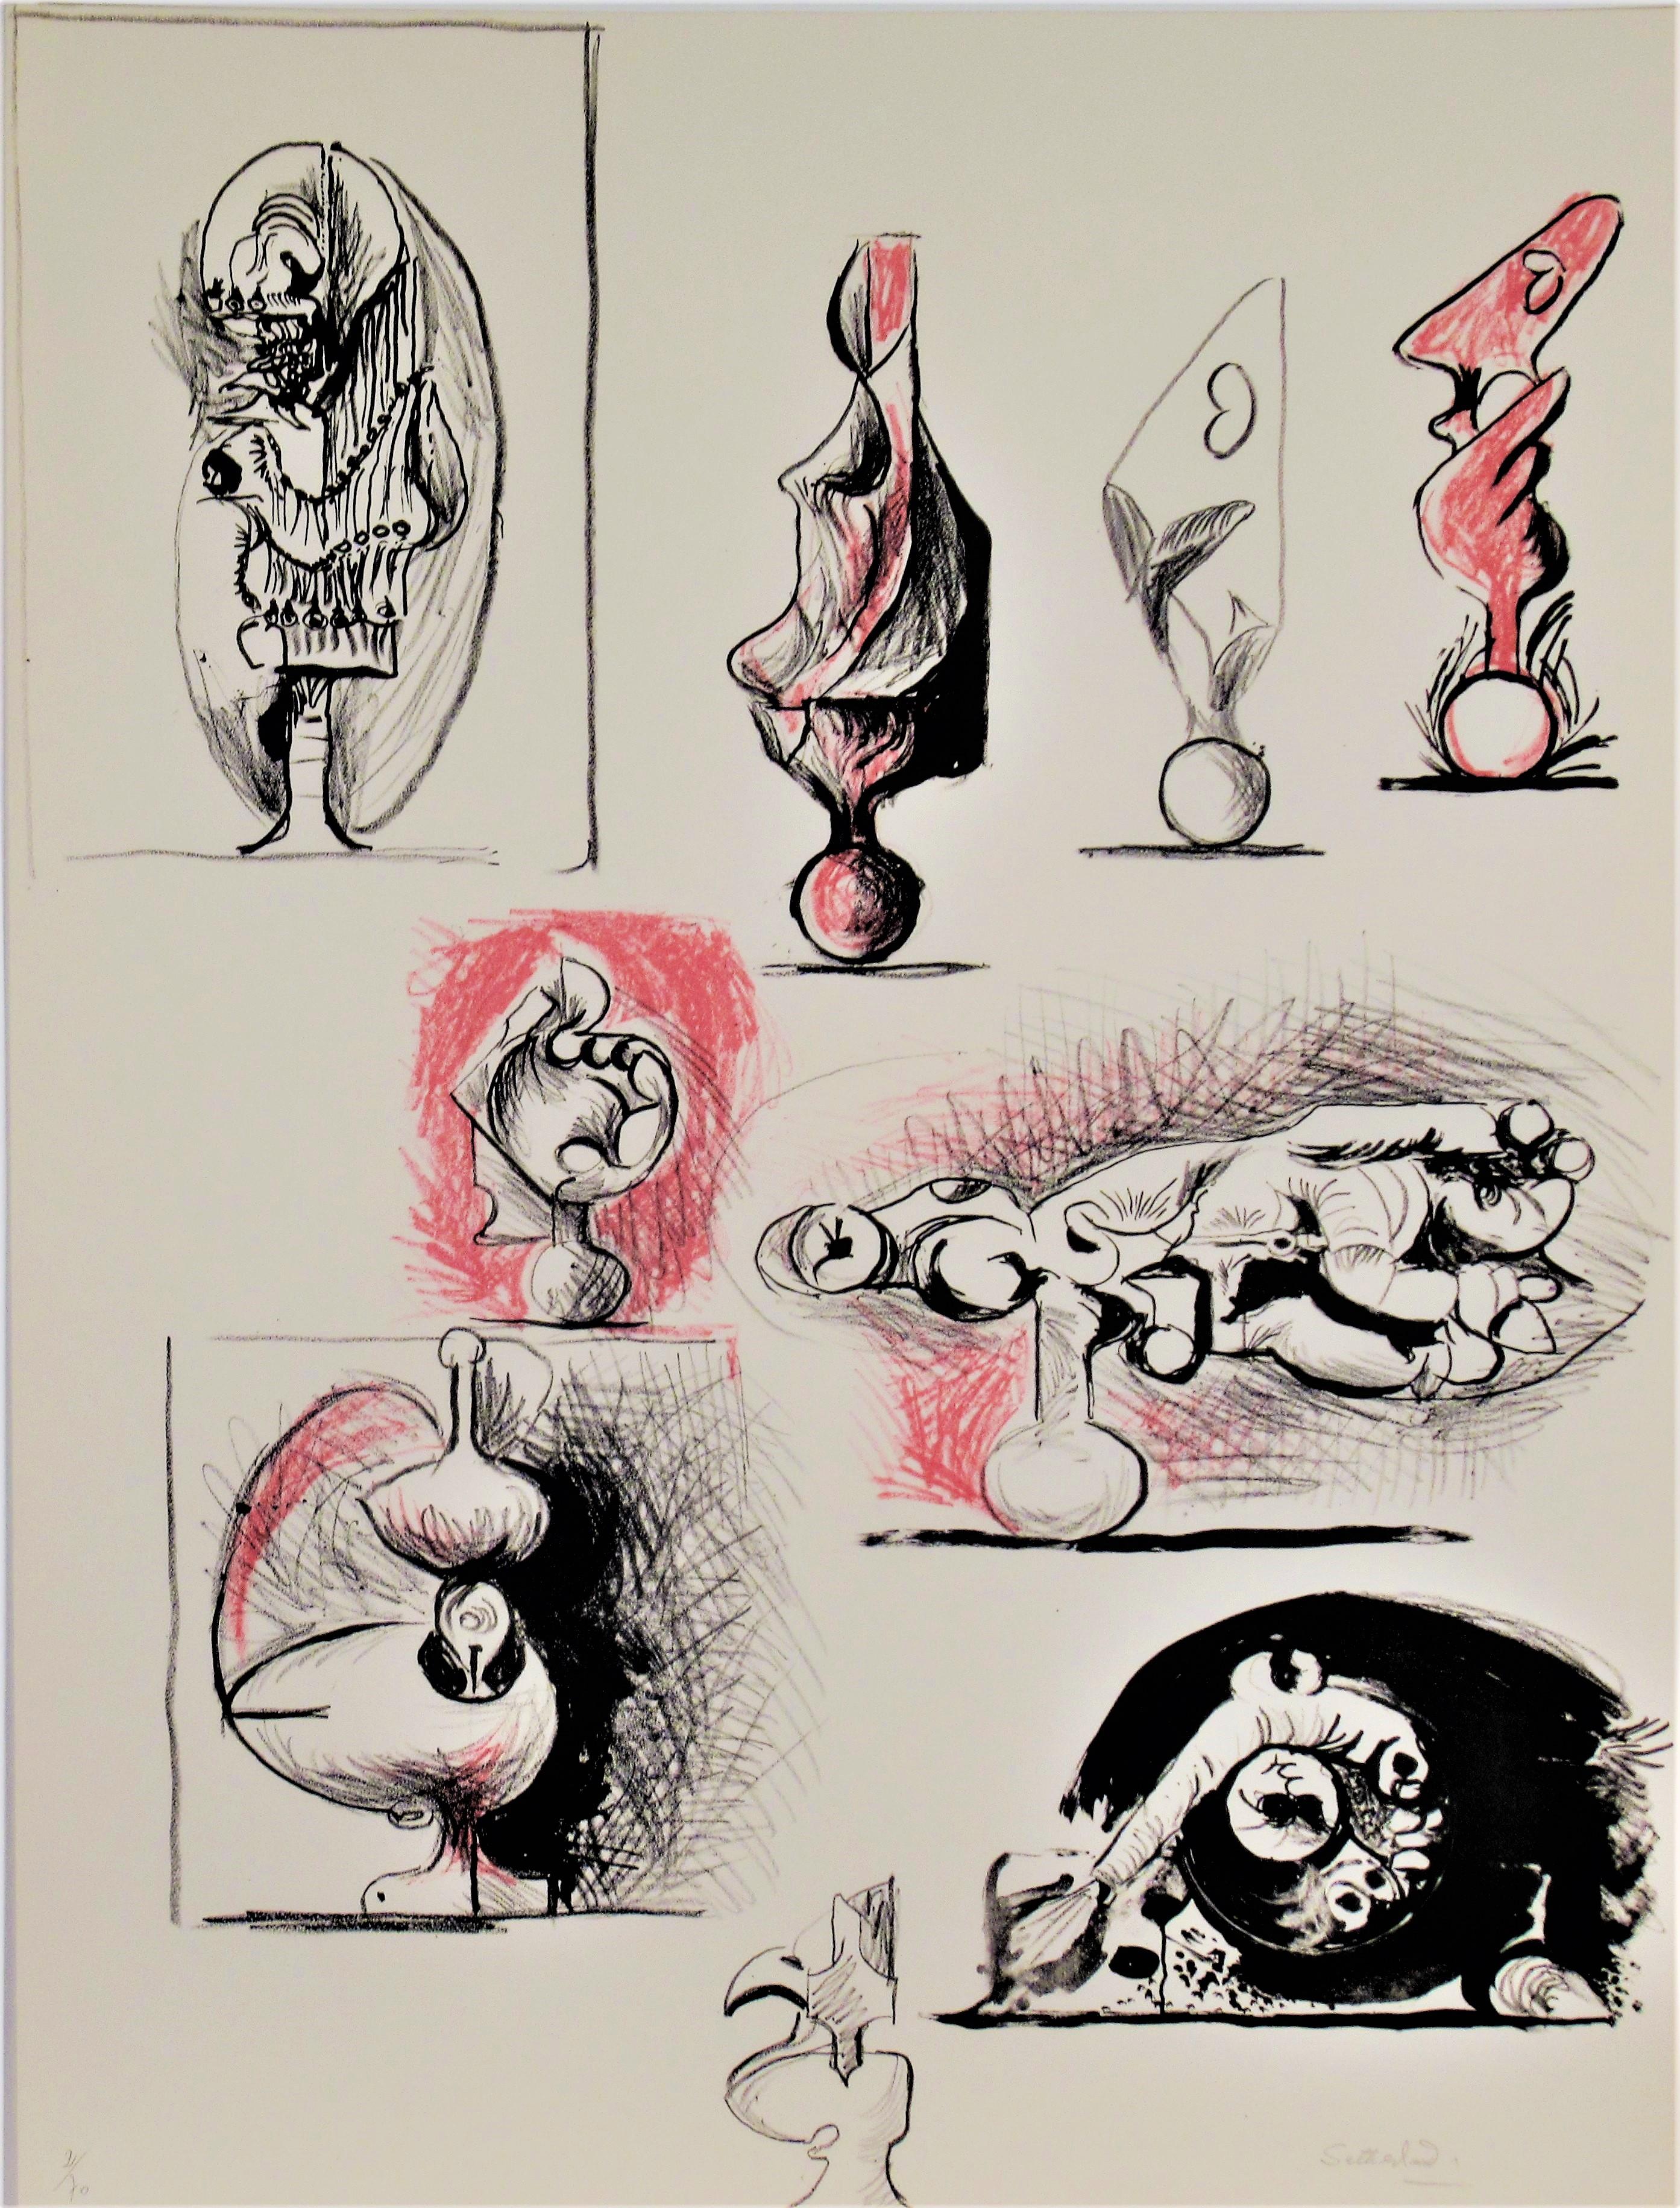 Graham Sutherland Animal Print - "Sheet of Studies" from the suite "Bestiary and some Correspondences" 